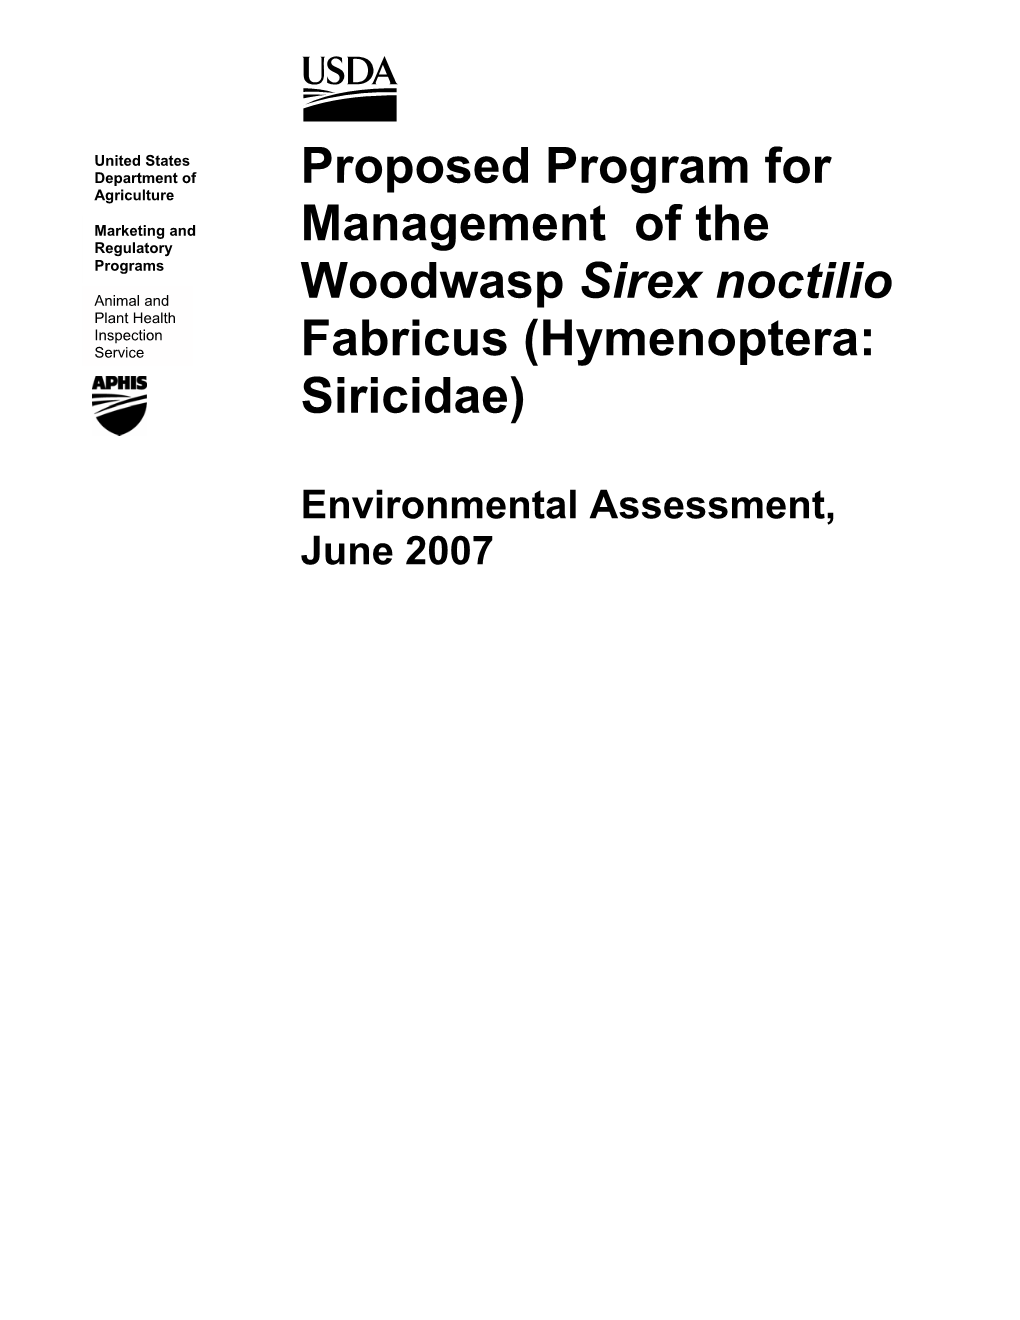 Proposed Program for Management of the Woodwasp Sirex Noctilio Fabricus (Hymenoptera: Siricidae)